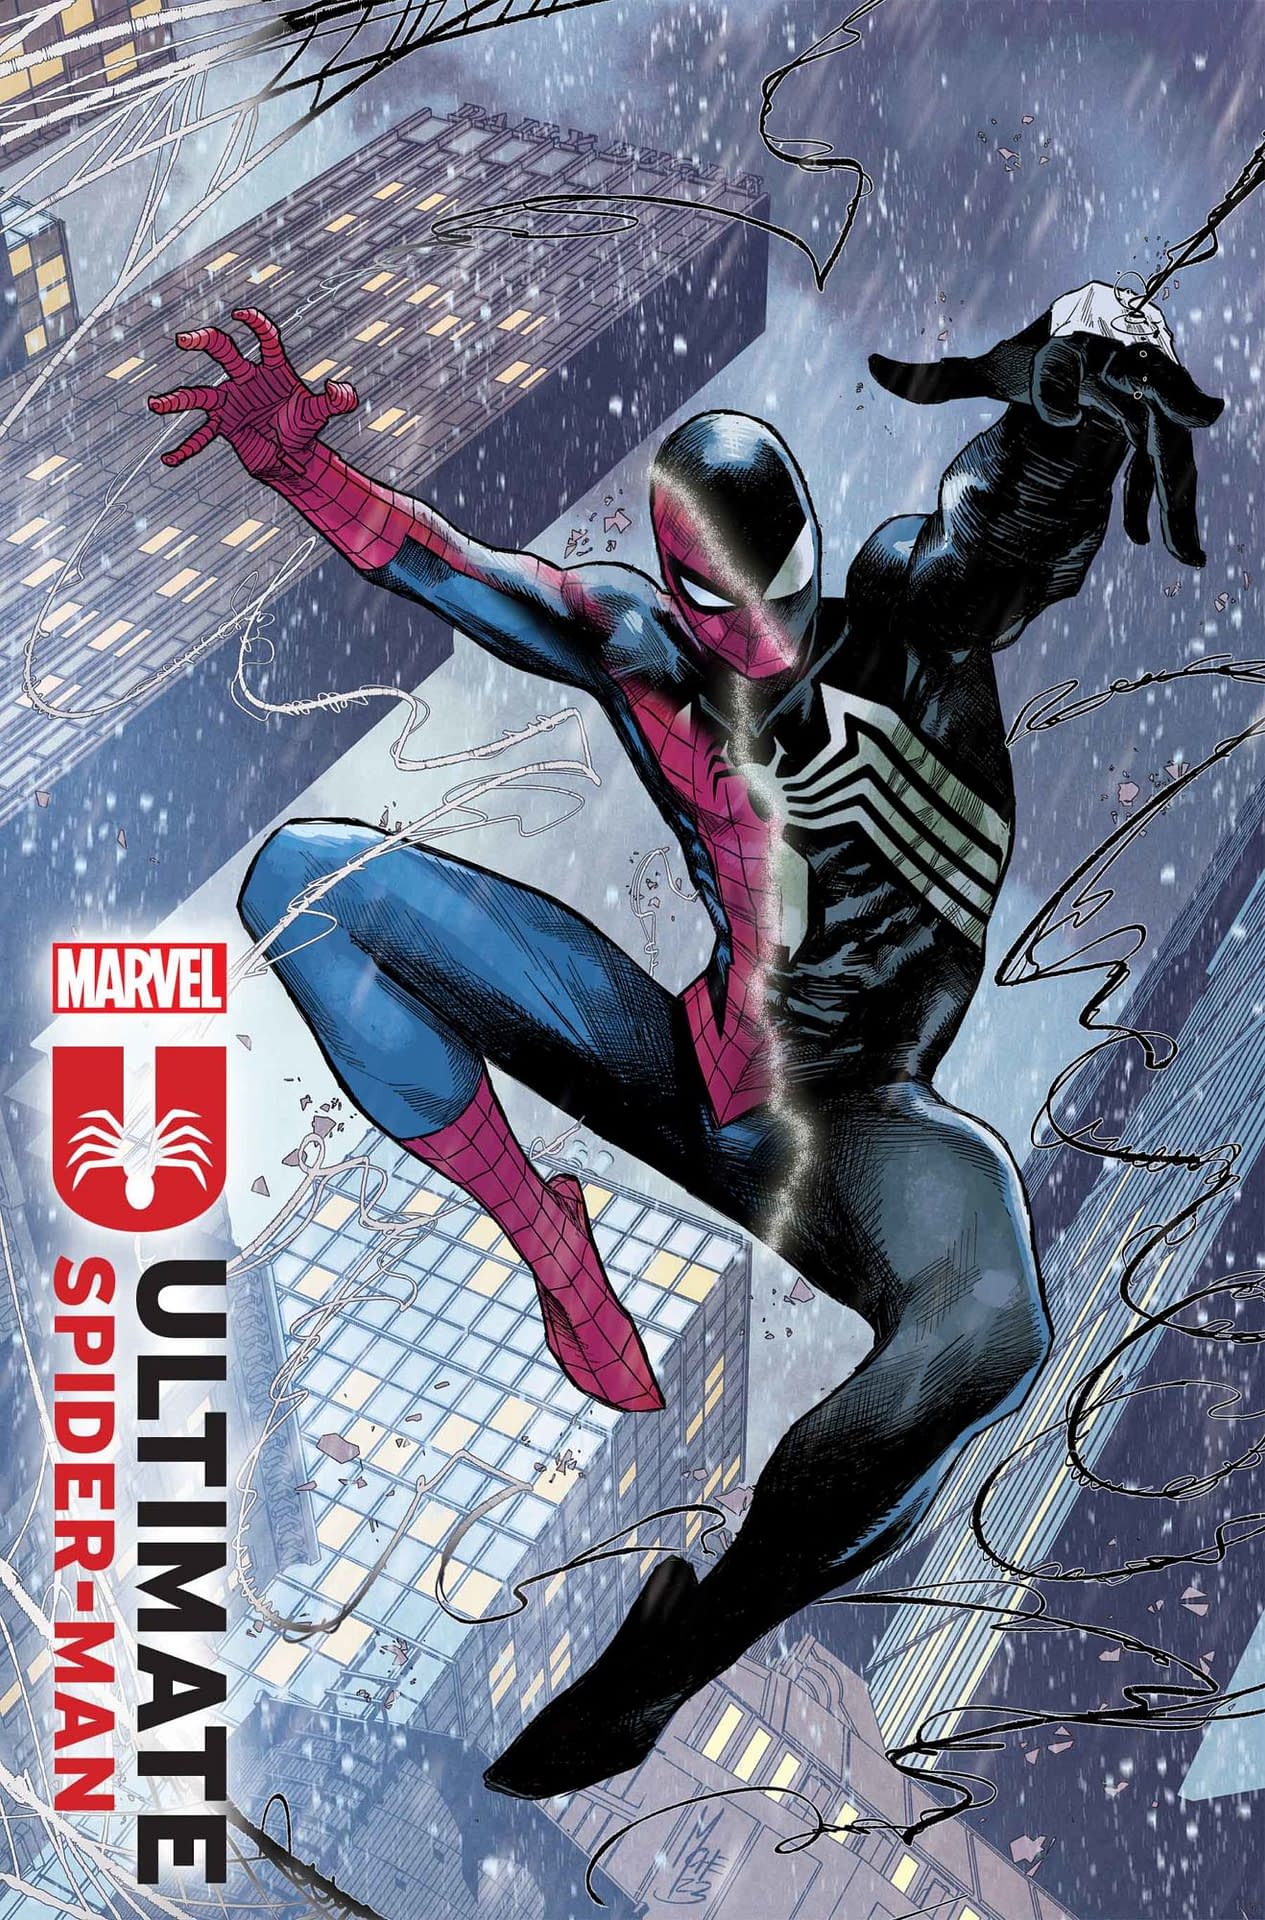 Ultimate Spider-Man returns with Hickman and Checchetto